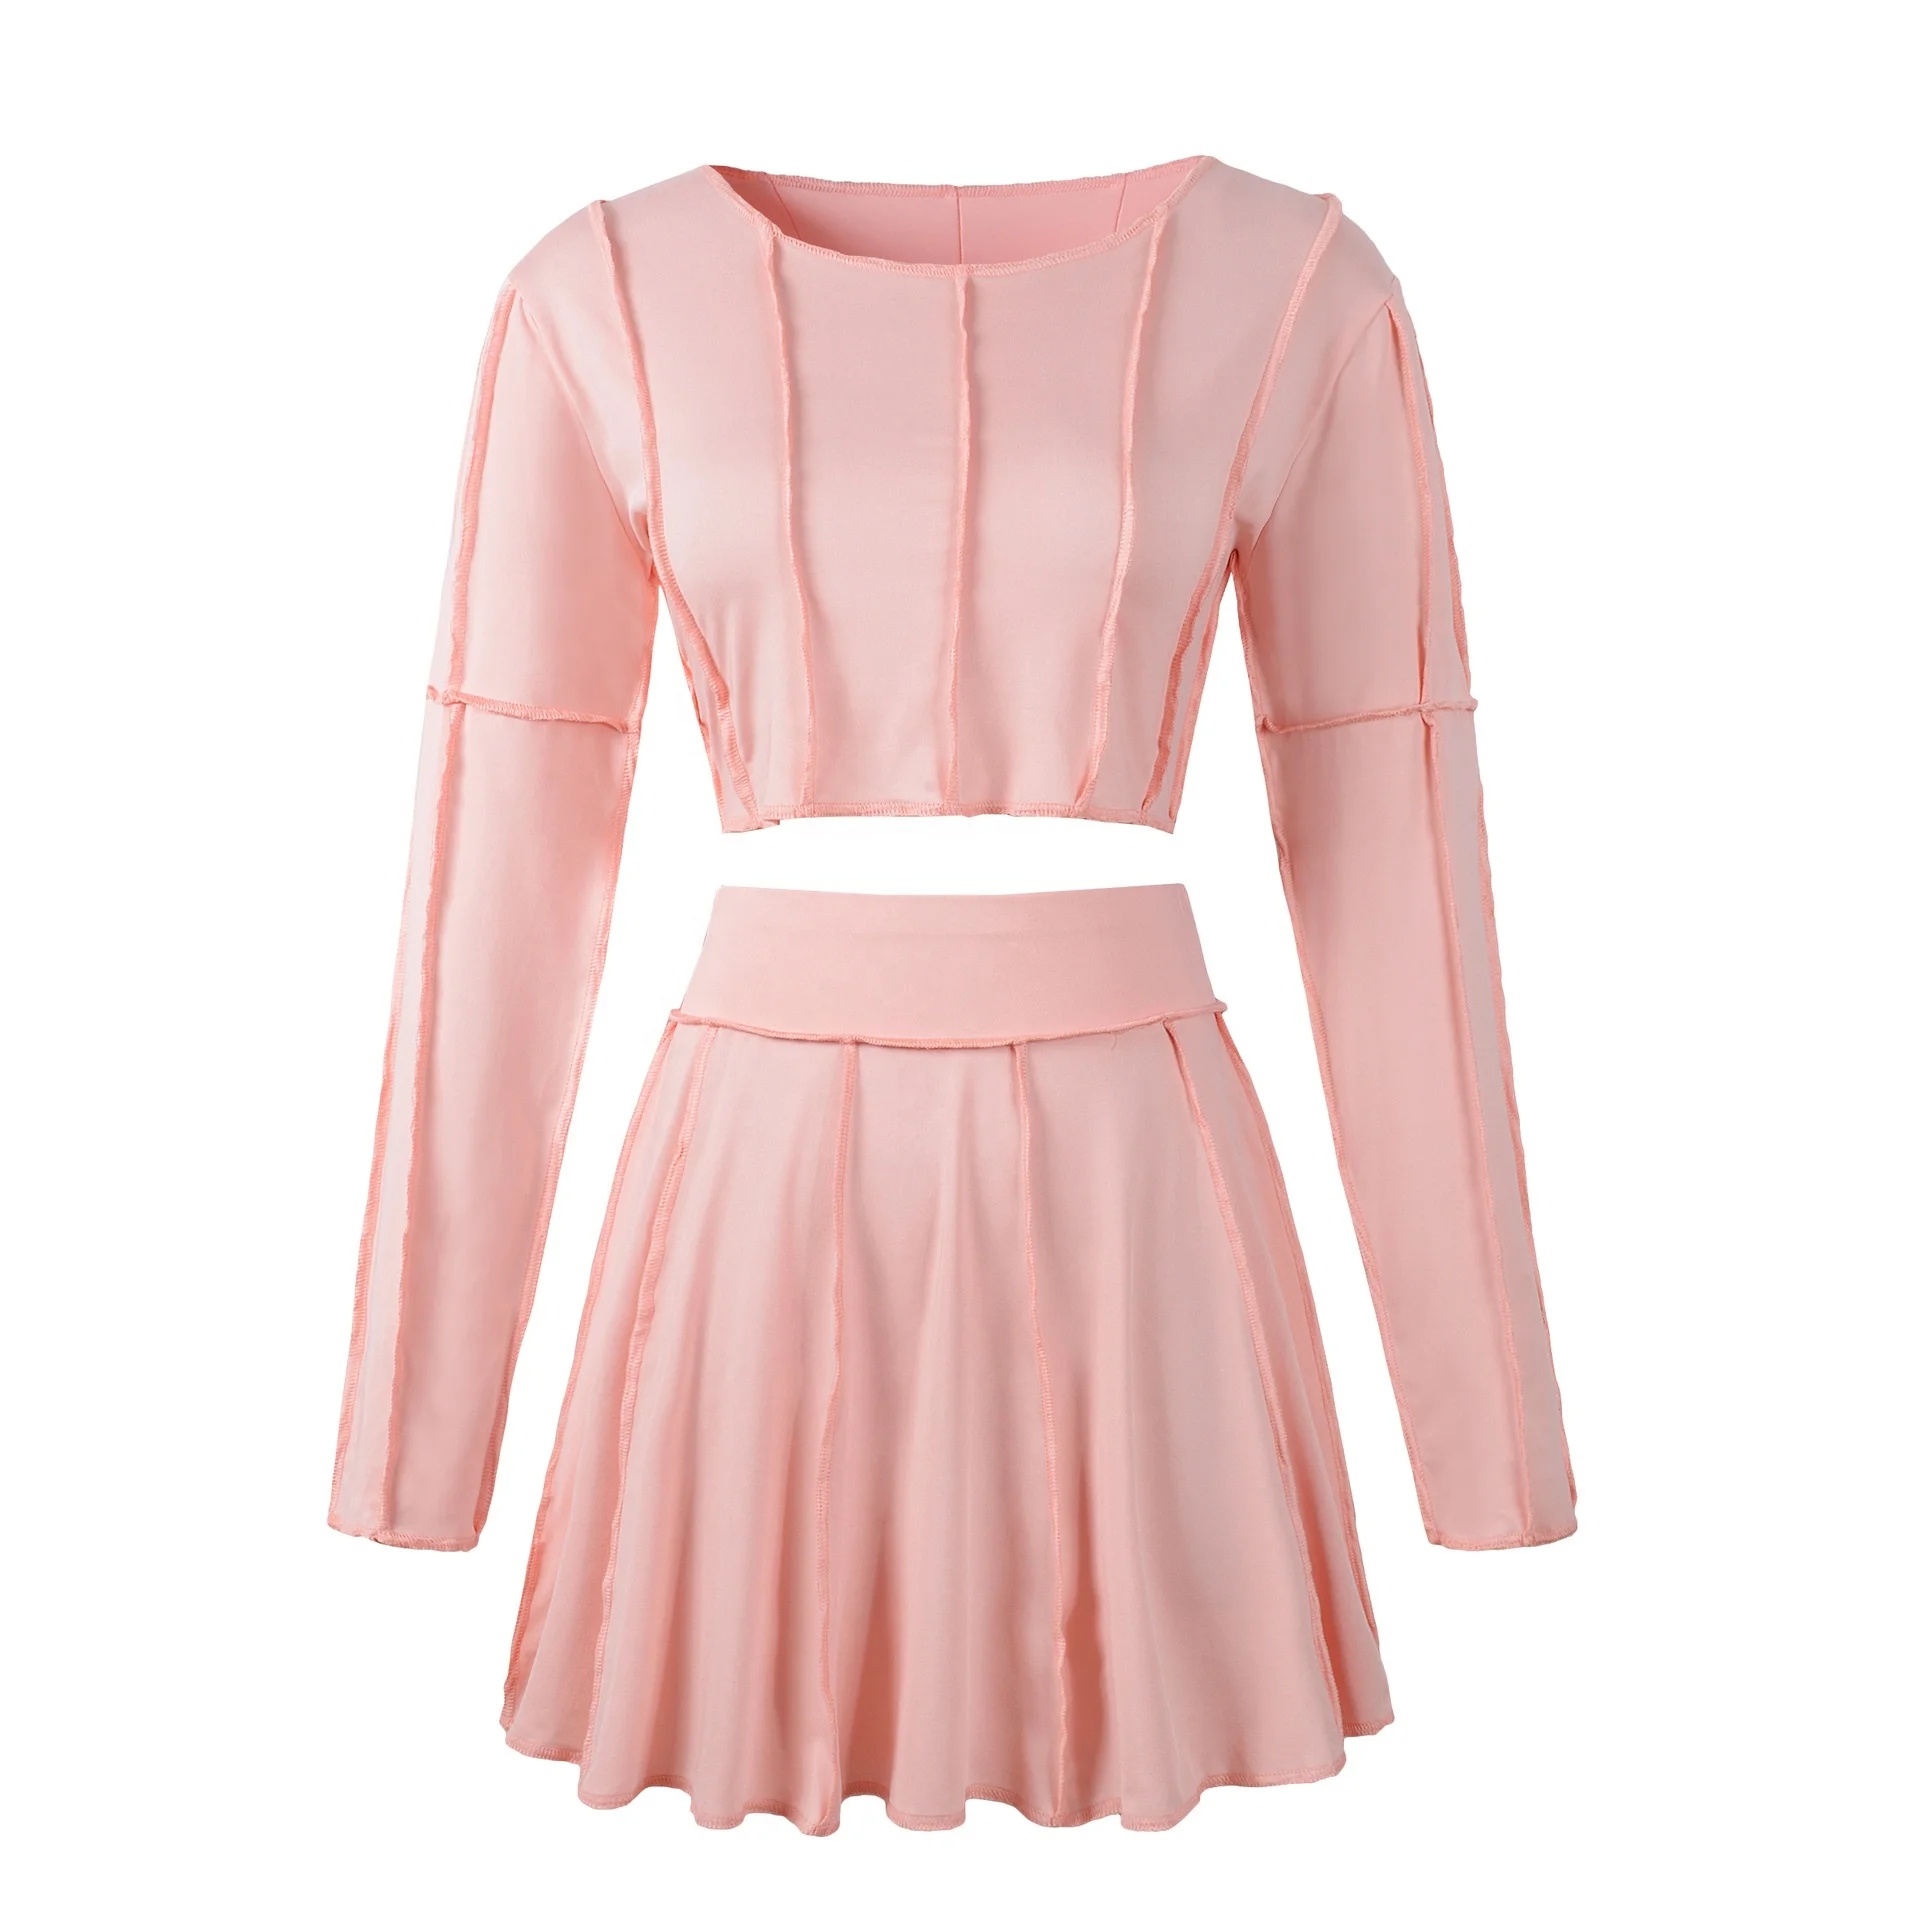 
208297 Hot sale pink 2 piece set fashion ladies clothing long sleeve mini pleated women skirt sets two piece outfits 